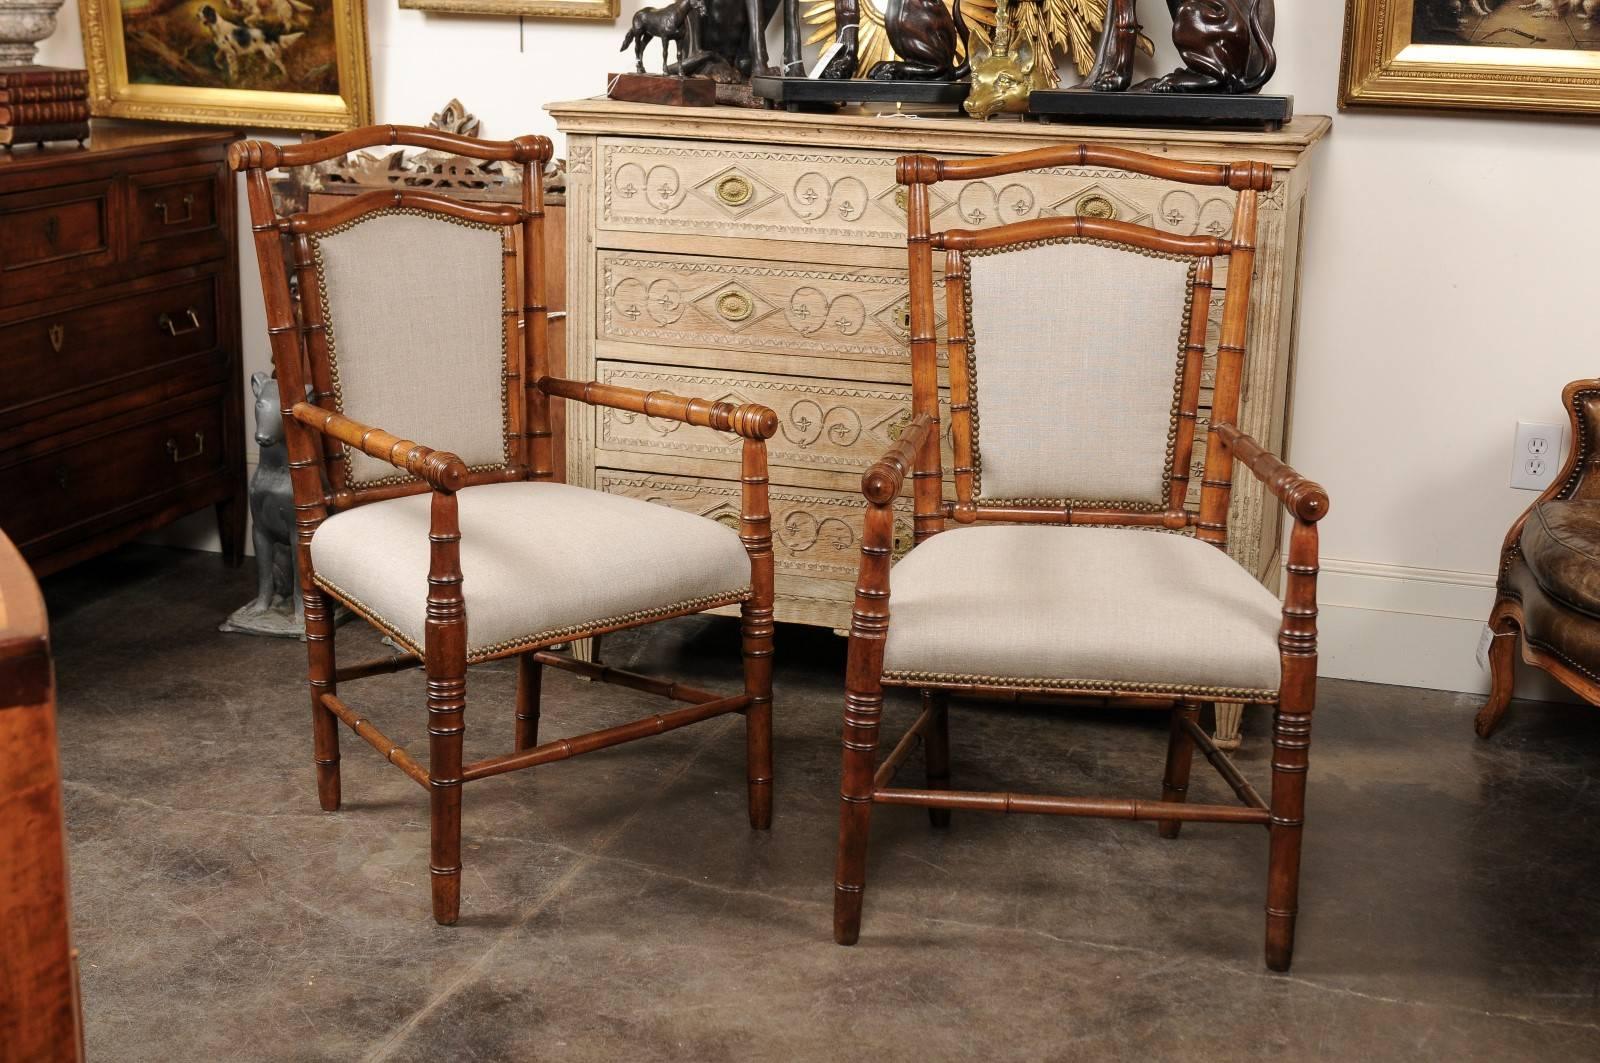 This pair of English faux-bamboo chairs from the turn of the century features slightly slanted backs with partial upholstery and nailhead trim over turned legs with side stretchers. The straight lines seen on the arms, legs and stretchers are gently